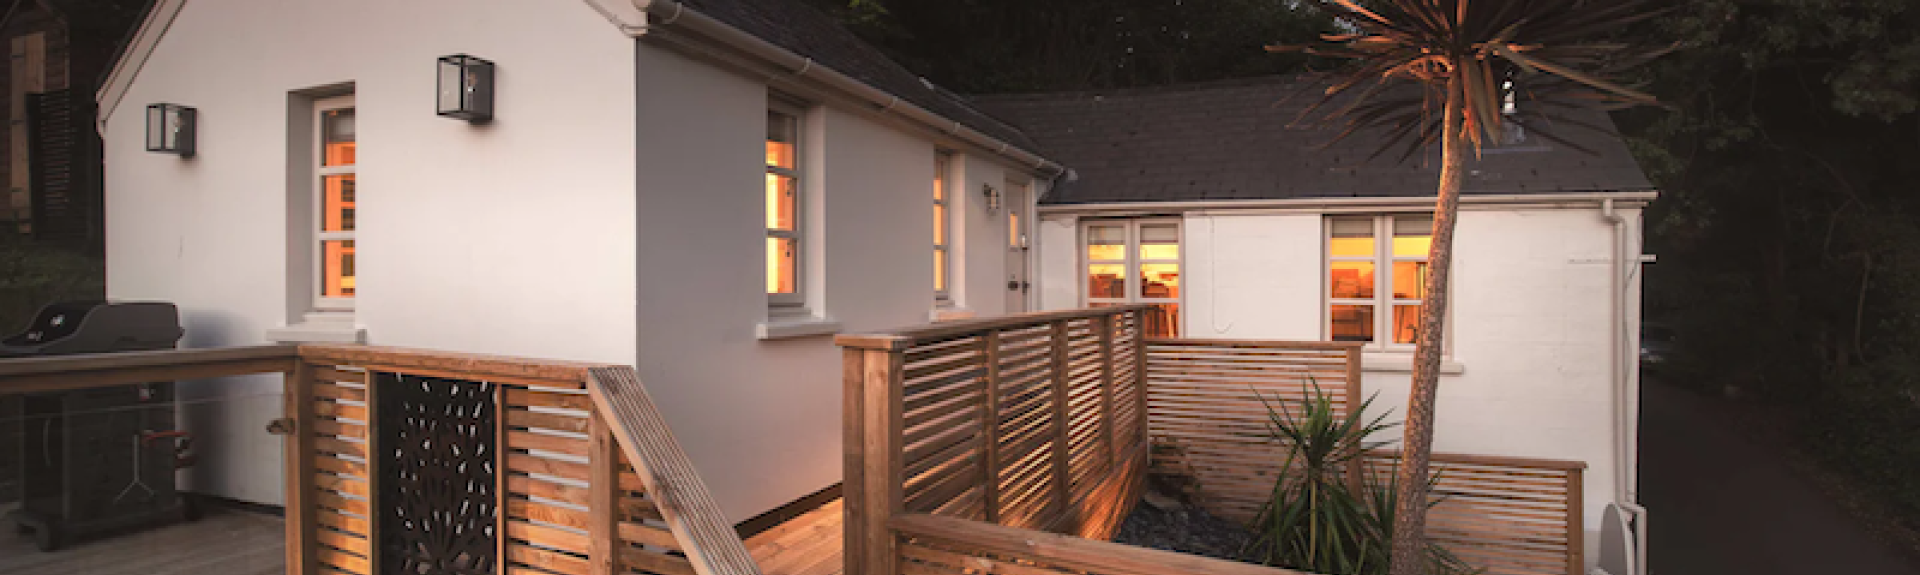 A modern Ilfracombe holiday cottage surrounded by a split level wooden deck at dusk.